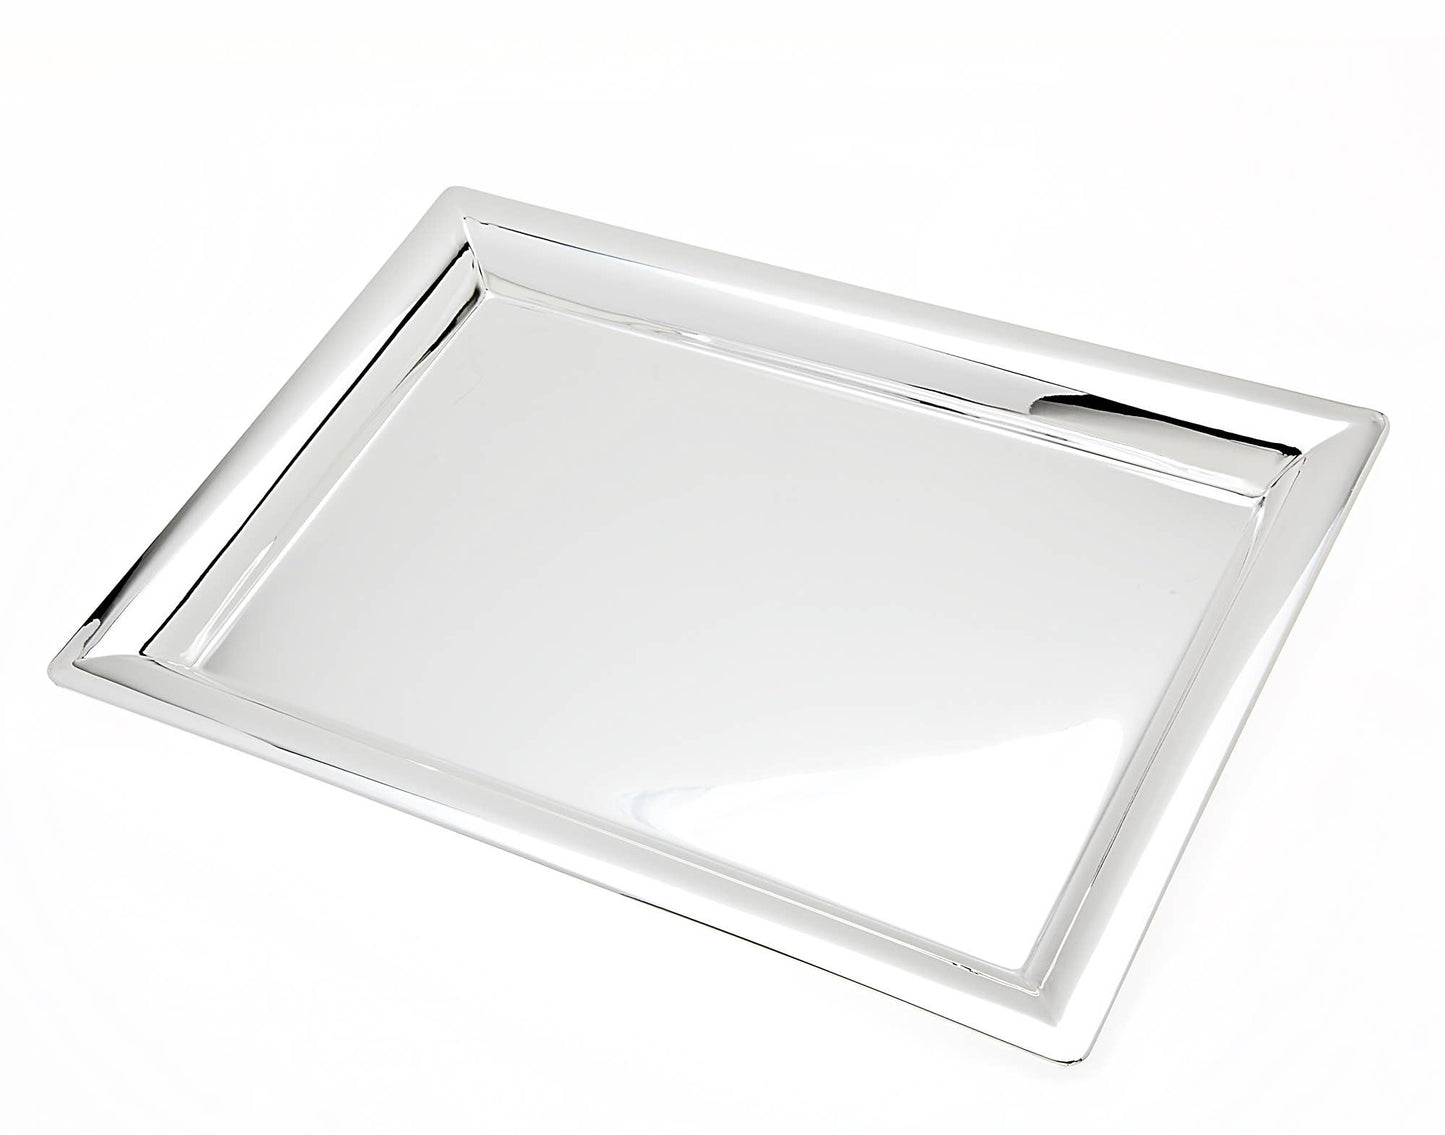 16x11" Chrome Plated Tray